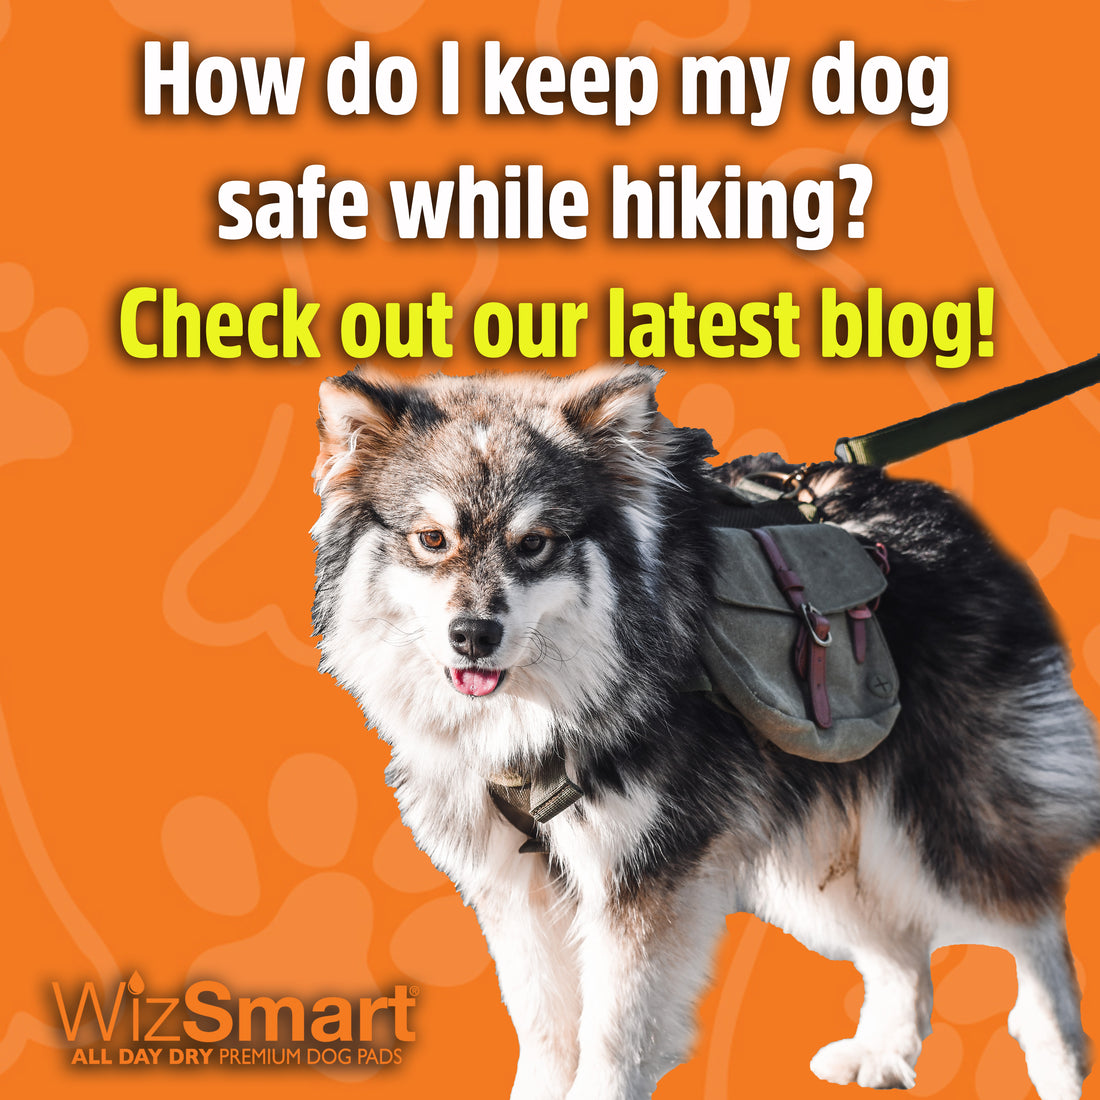 Spring is here! How to hike safely with your dog.